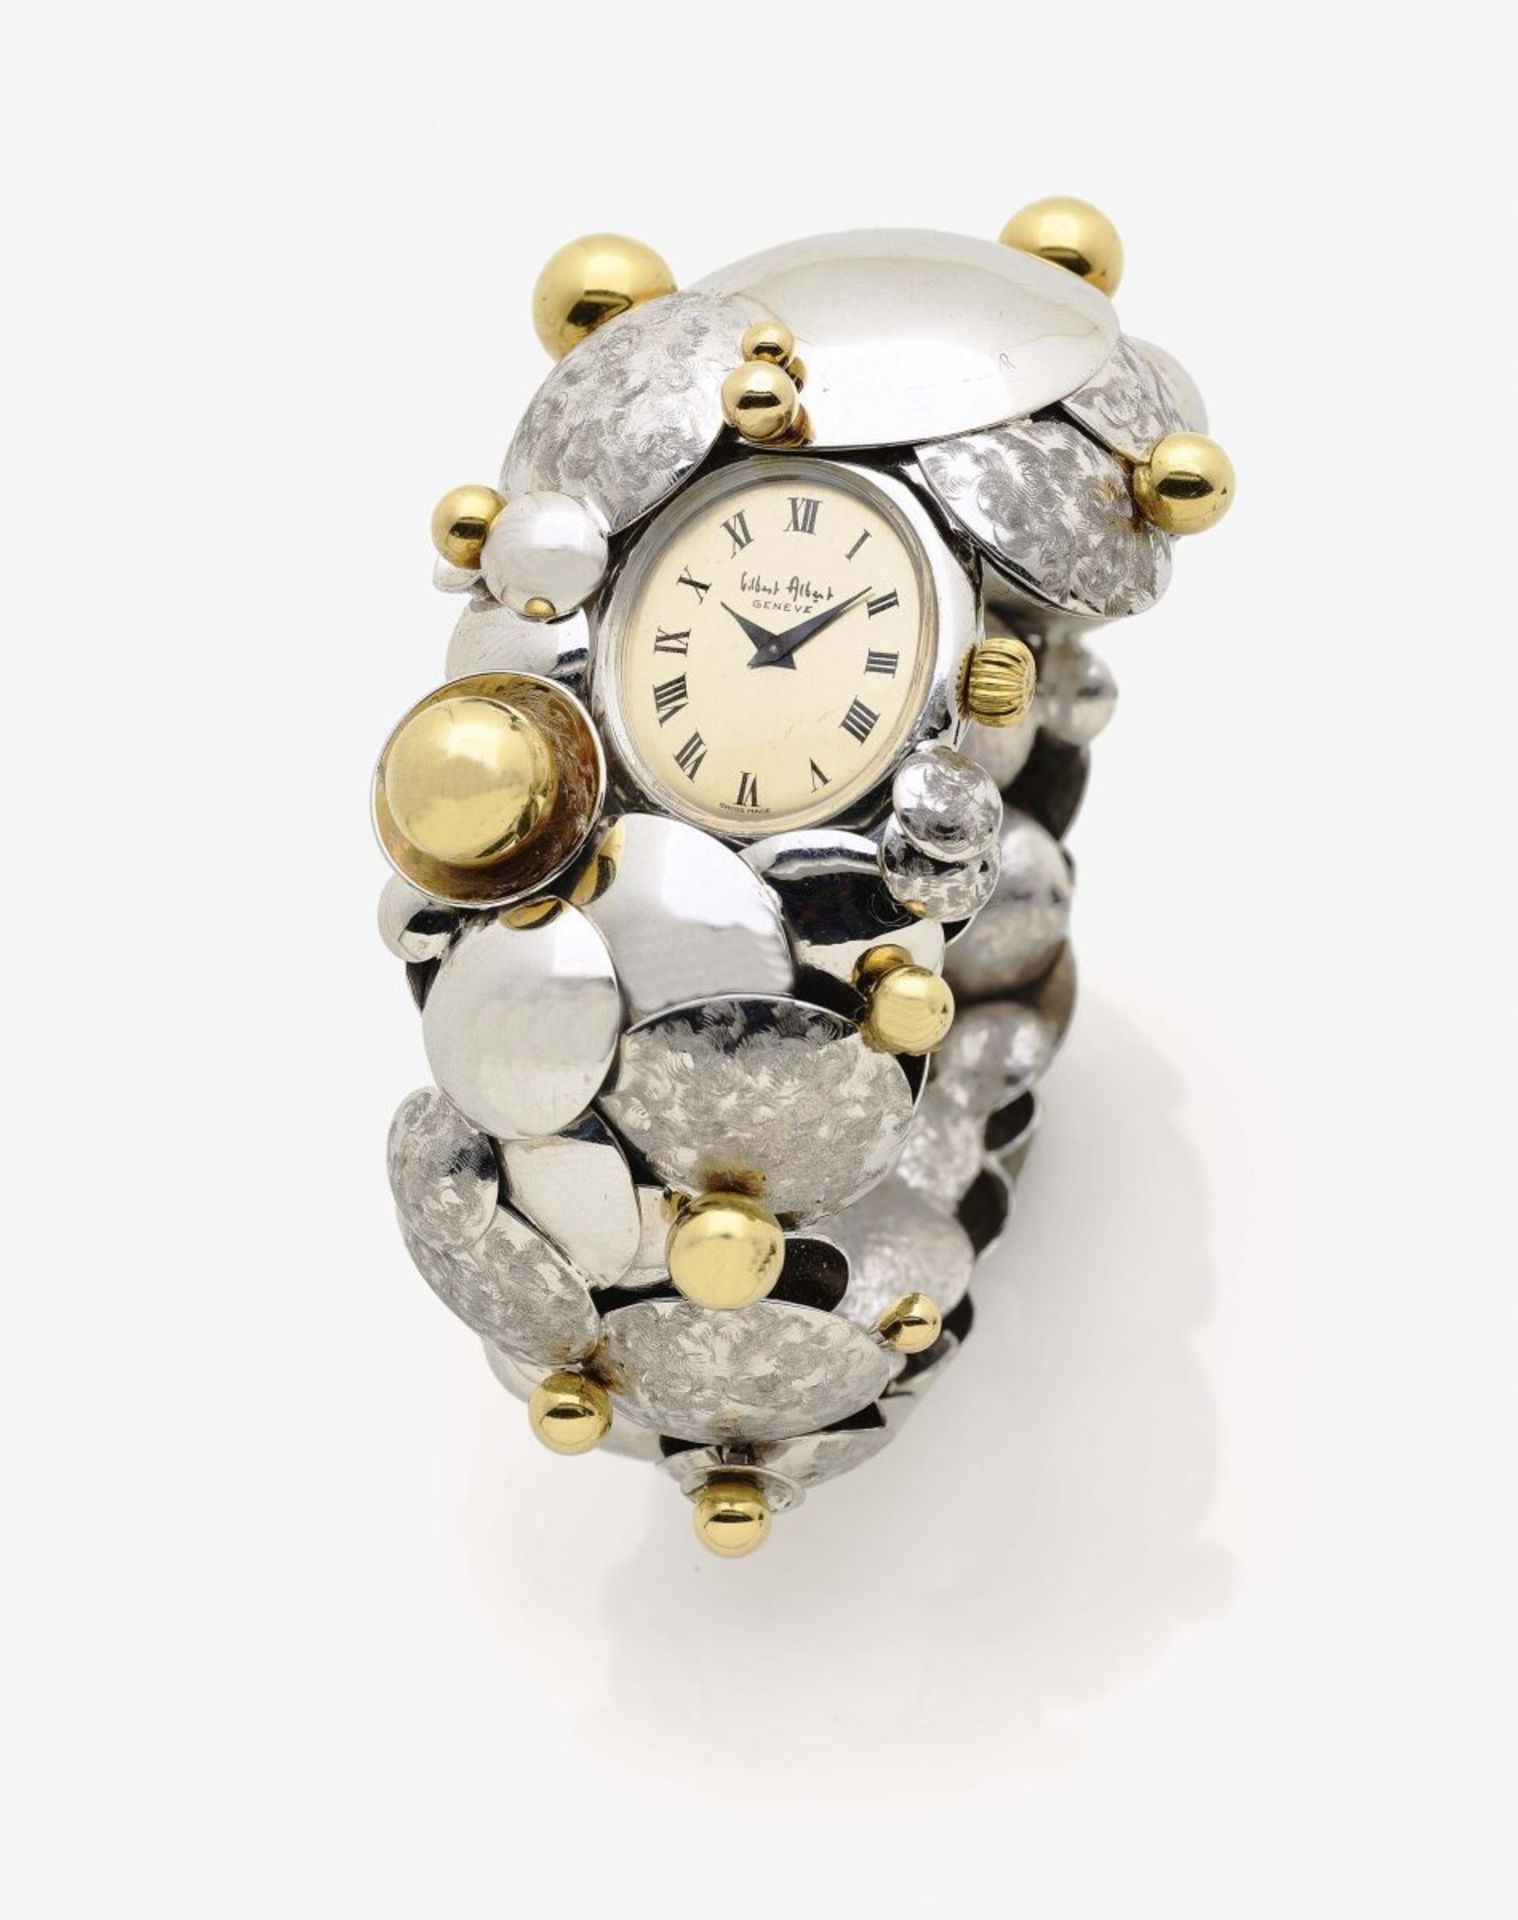 A Lady's Bracelet WatchSwitzerland, GILBERT ALBERT and BUECHE-GIROD 18K white and yellow gold (